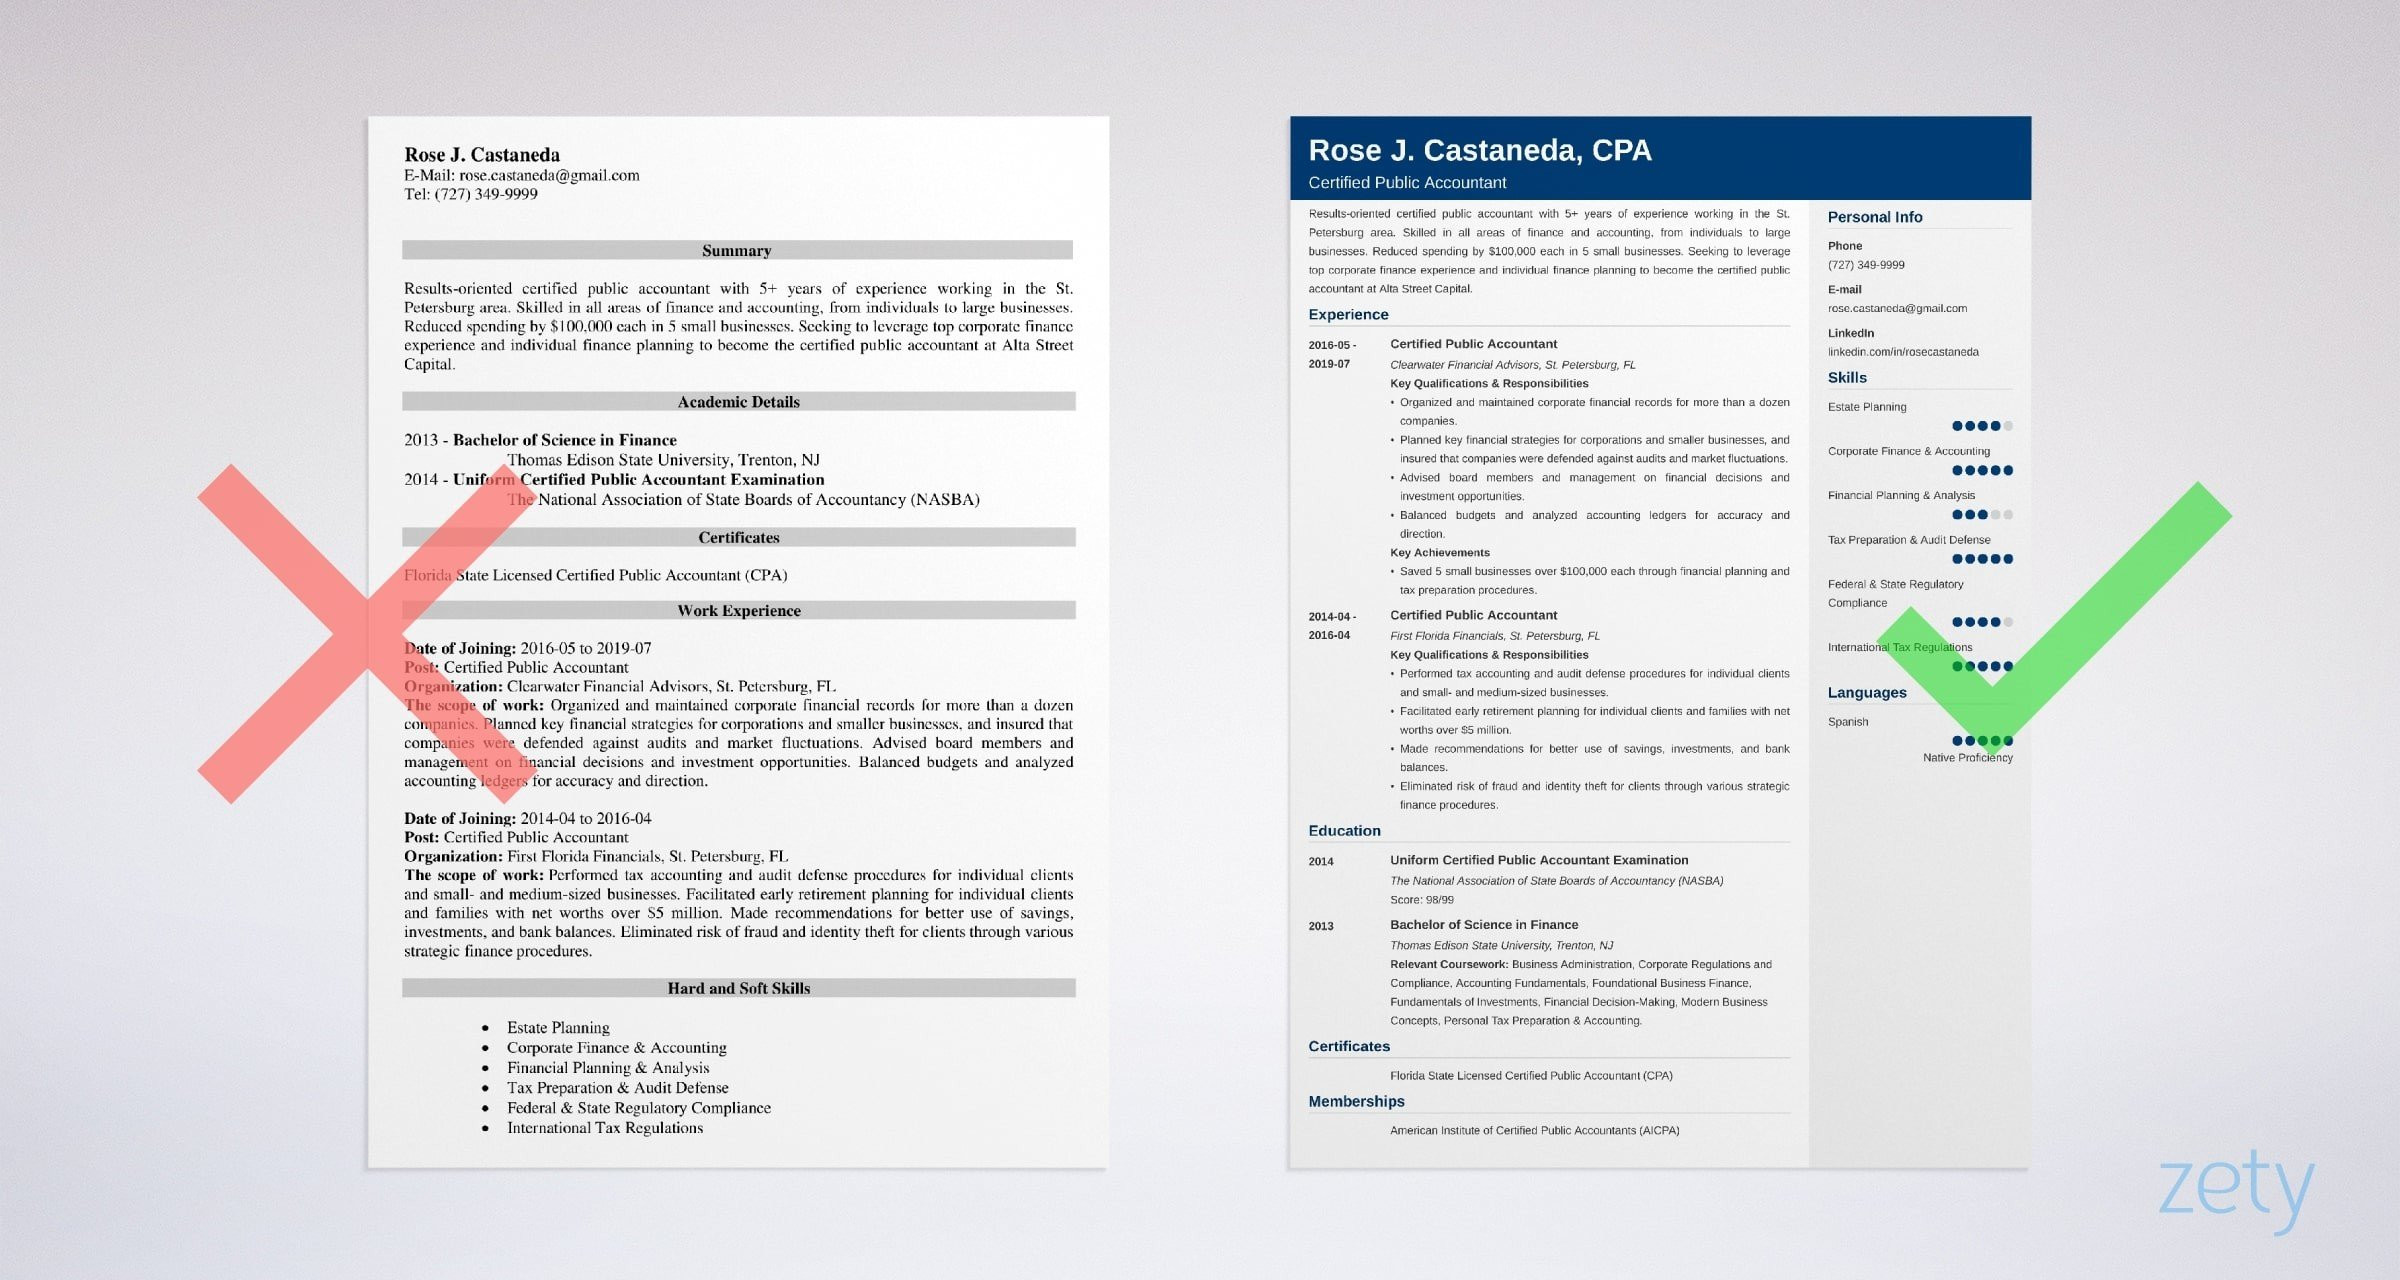 Sample Resume Duties Accomplishments and Related Skills Accountant Cpa Field Certified Public Accountant (cpa) Resume Sample & Guide